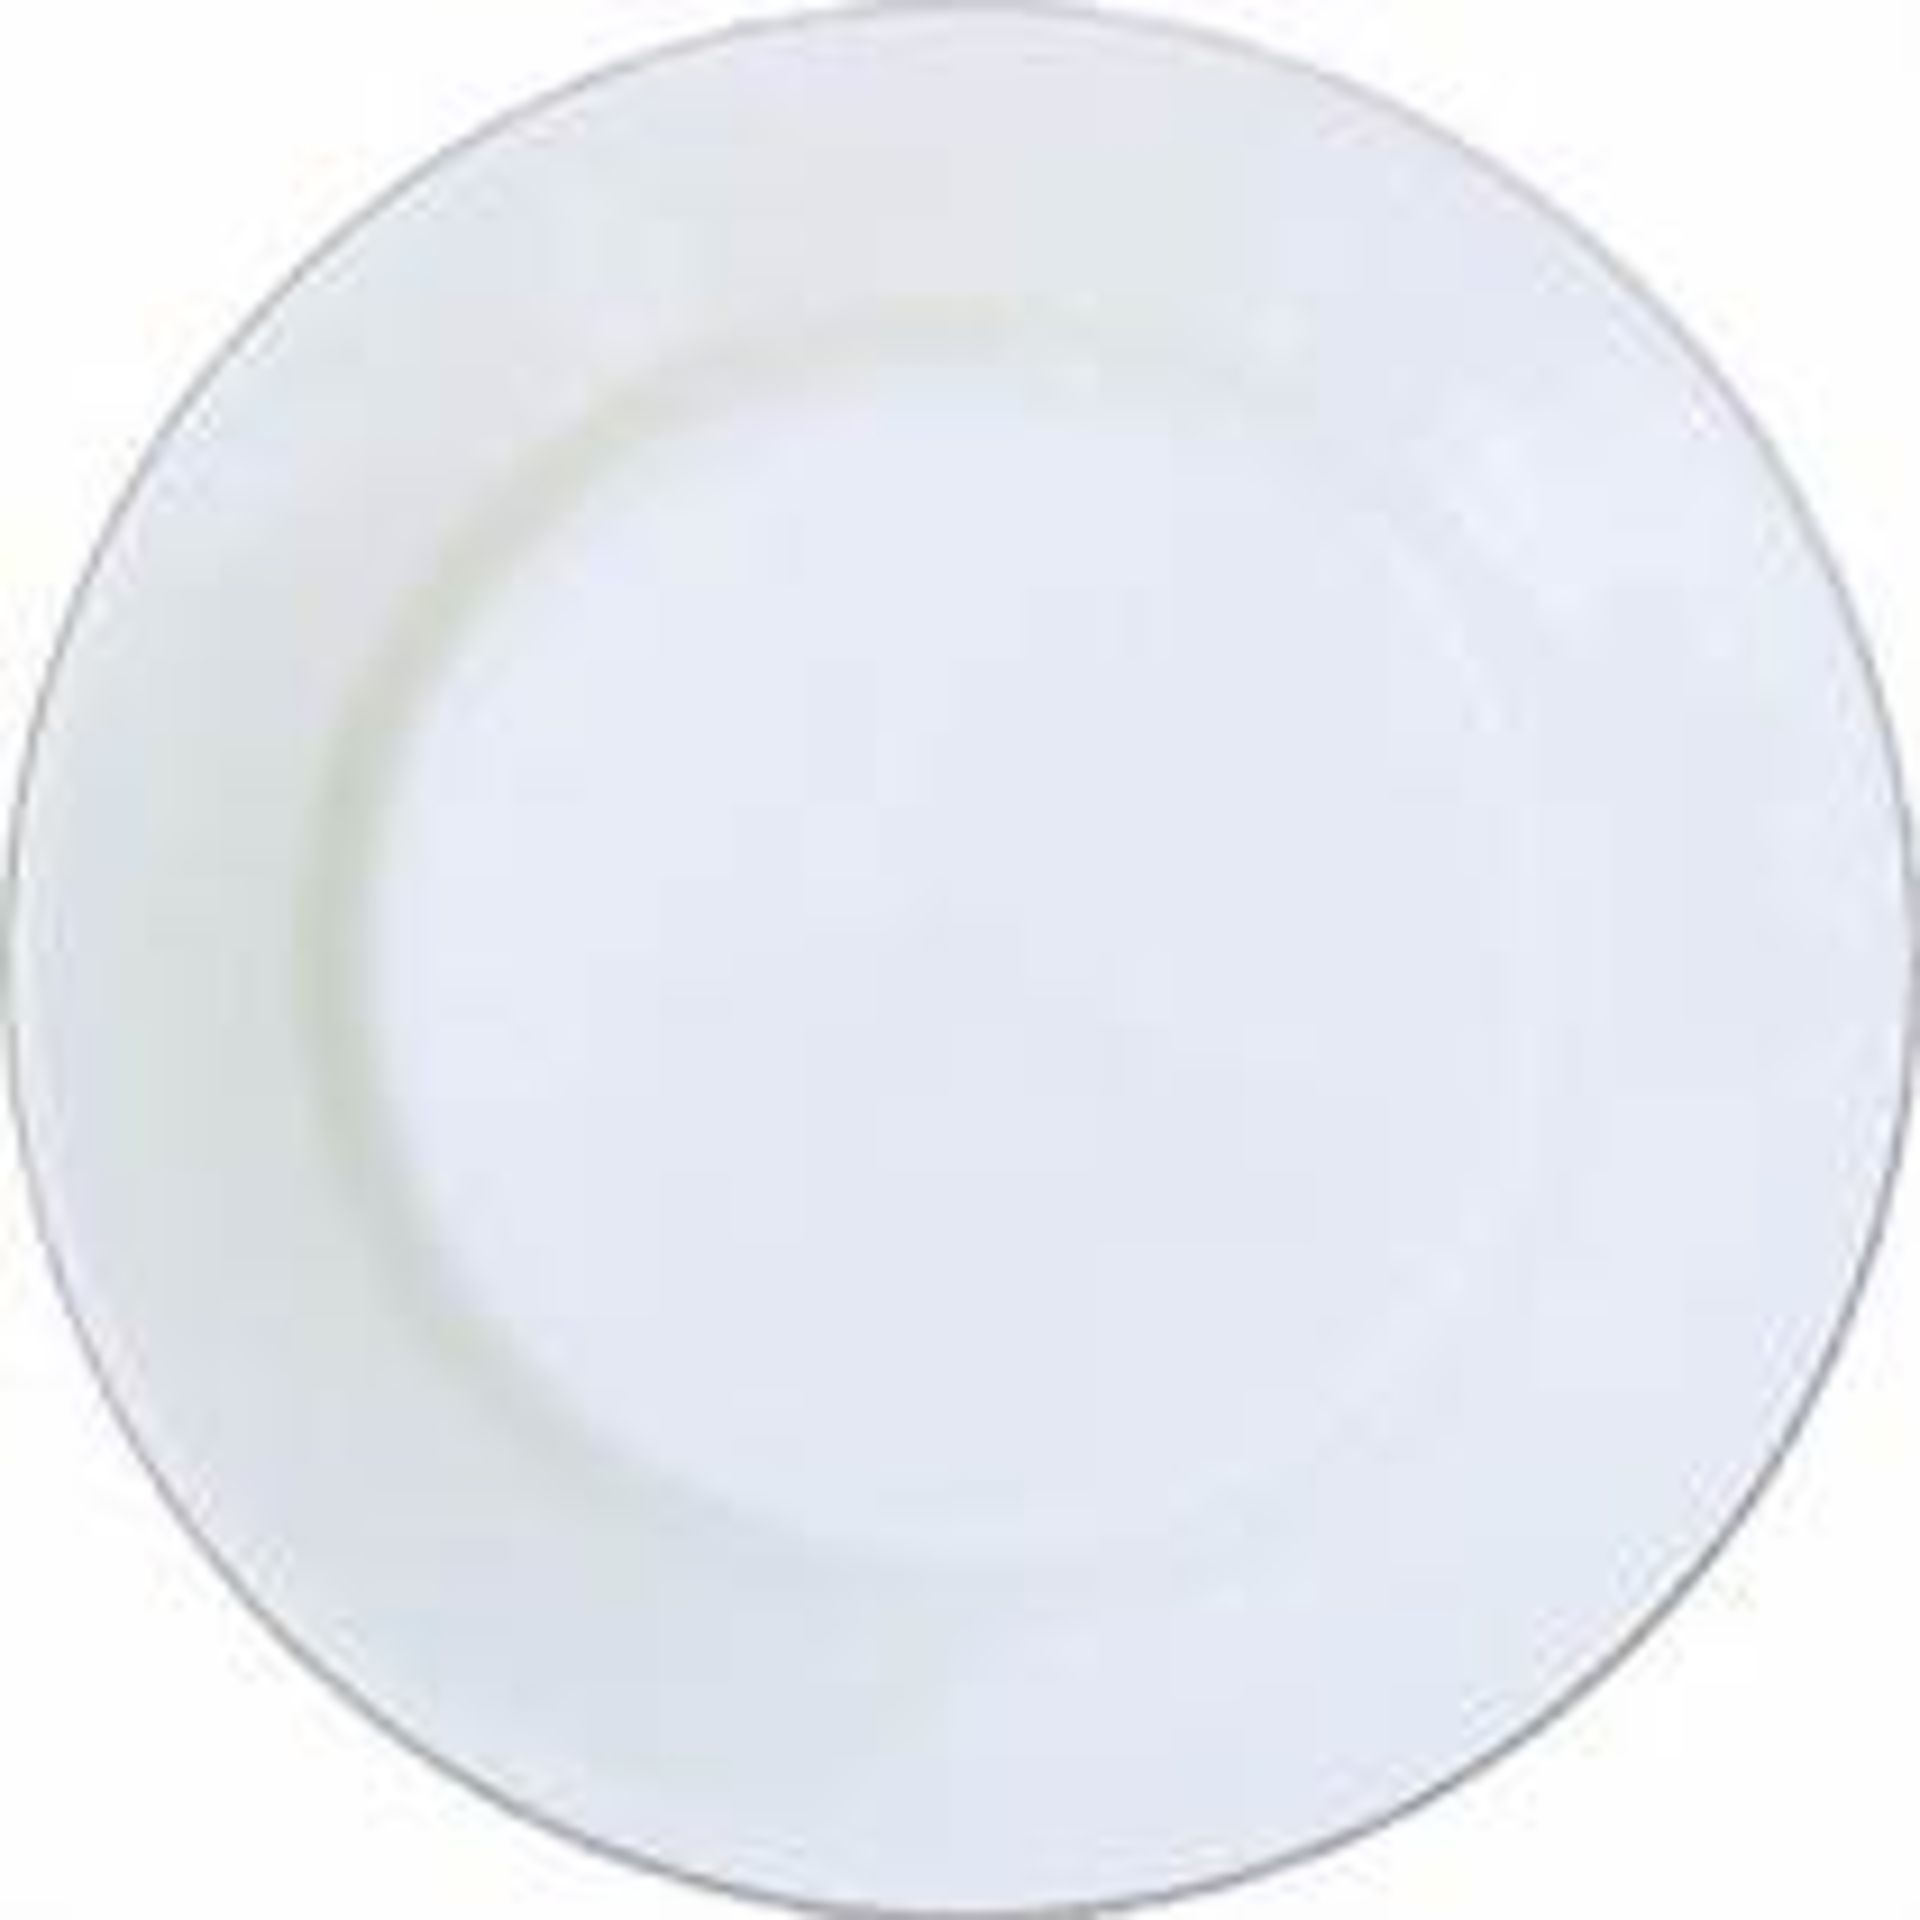 2 X BRAND NEW PACKS OF 12 CHURCHILL WHITEWARE MEDITARRANEAN DISHES 280MM RRP £120 PER PACK